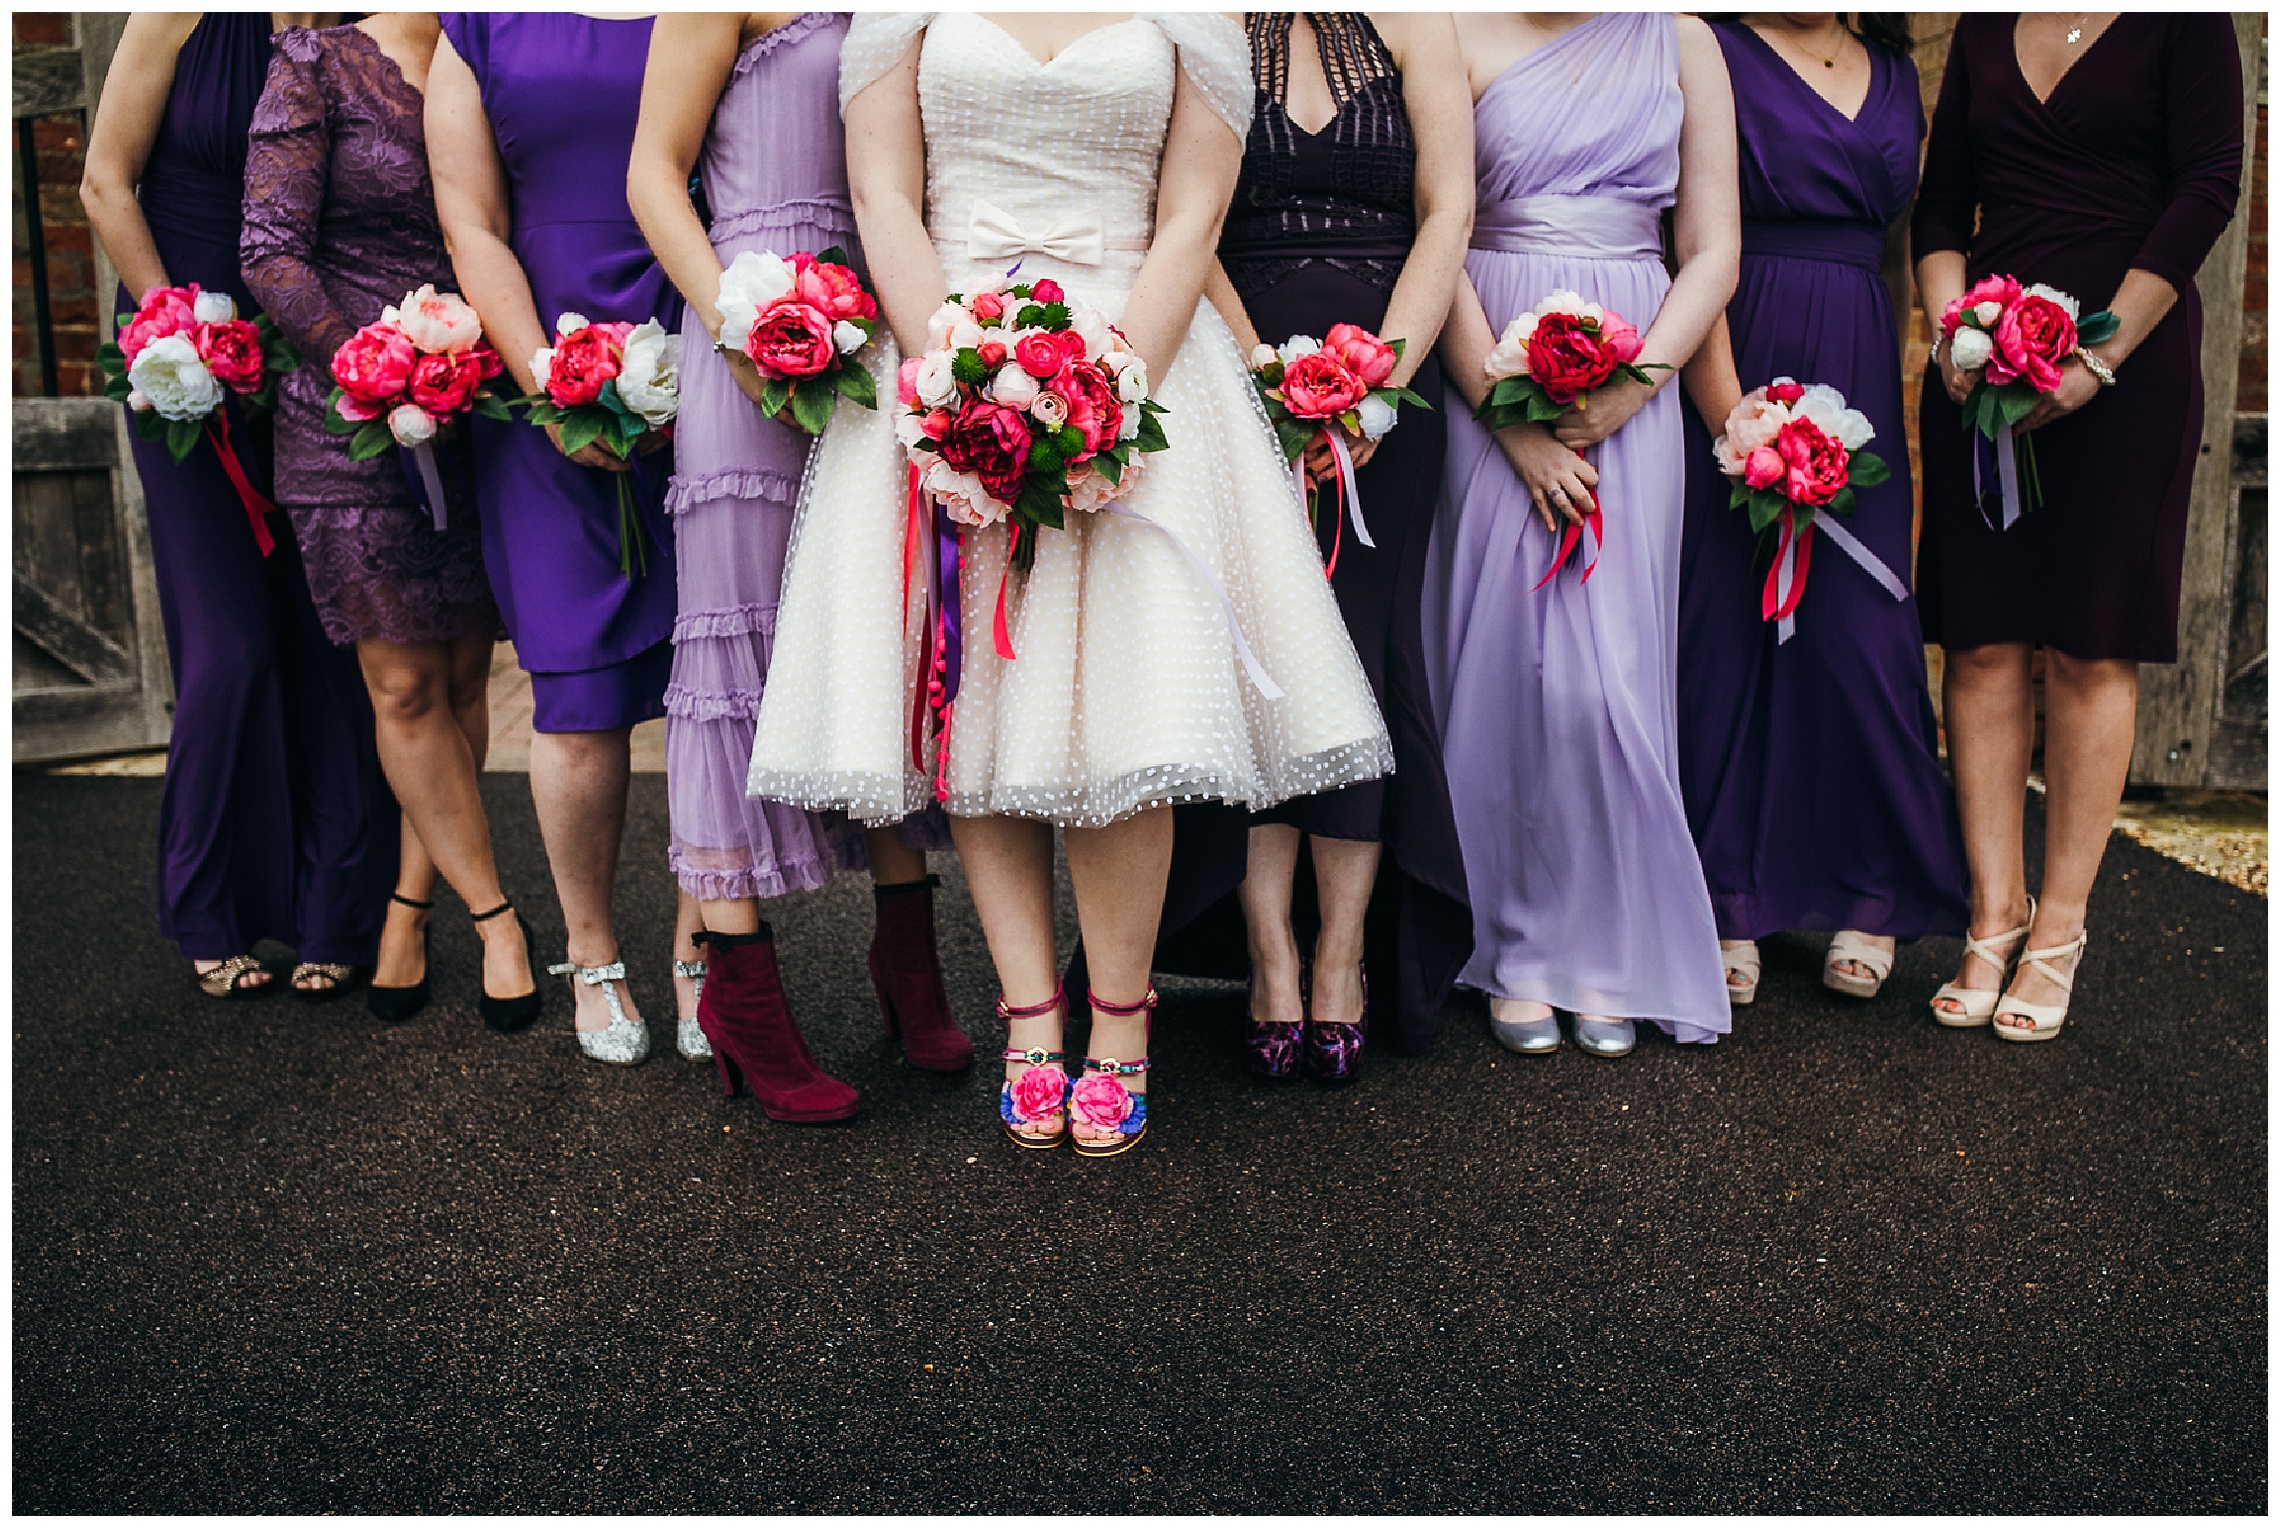 Bridesmaids in purple dresses clutching onto pink flowers